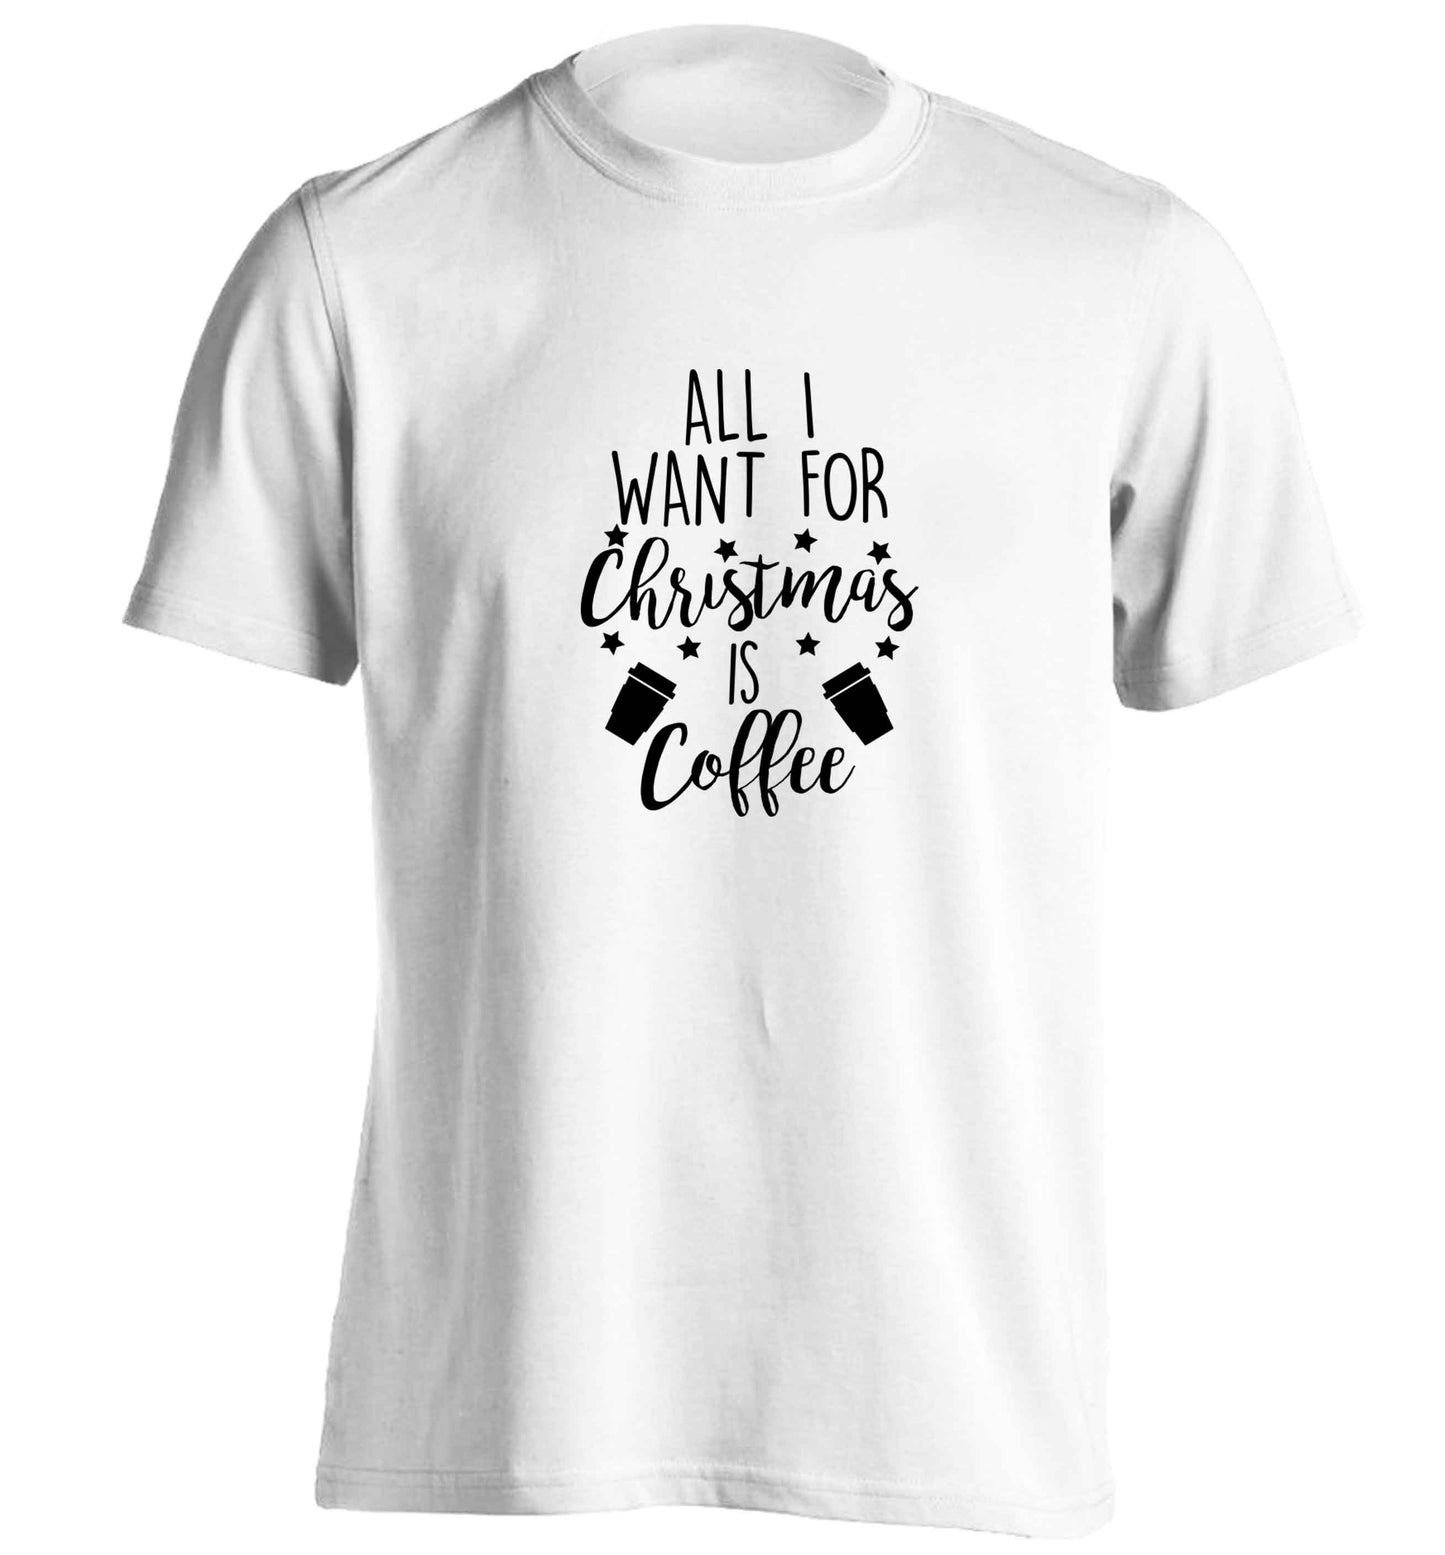 All I want for Christmas is coffee adults unisex white Tshirt 2XL